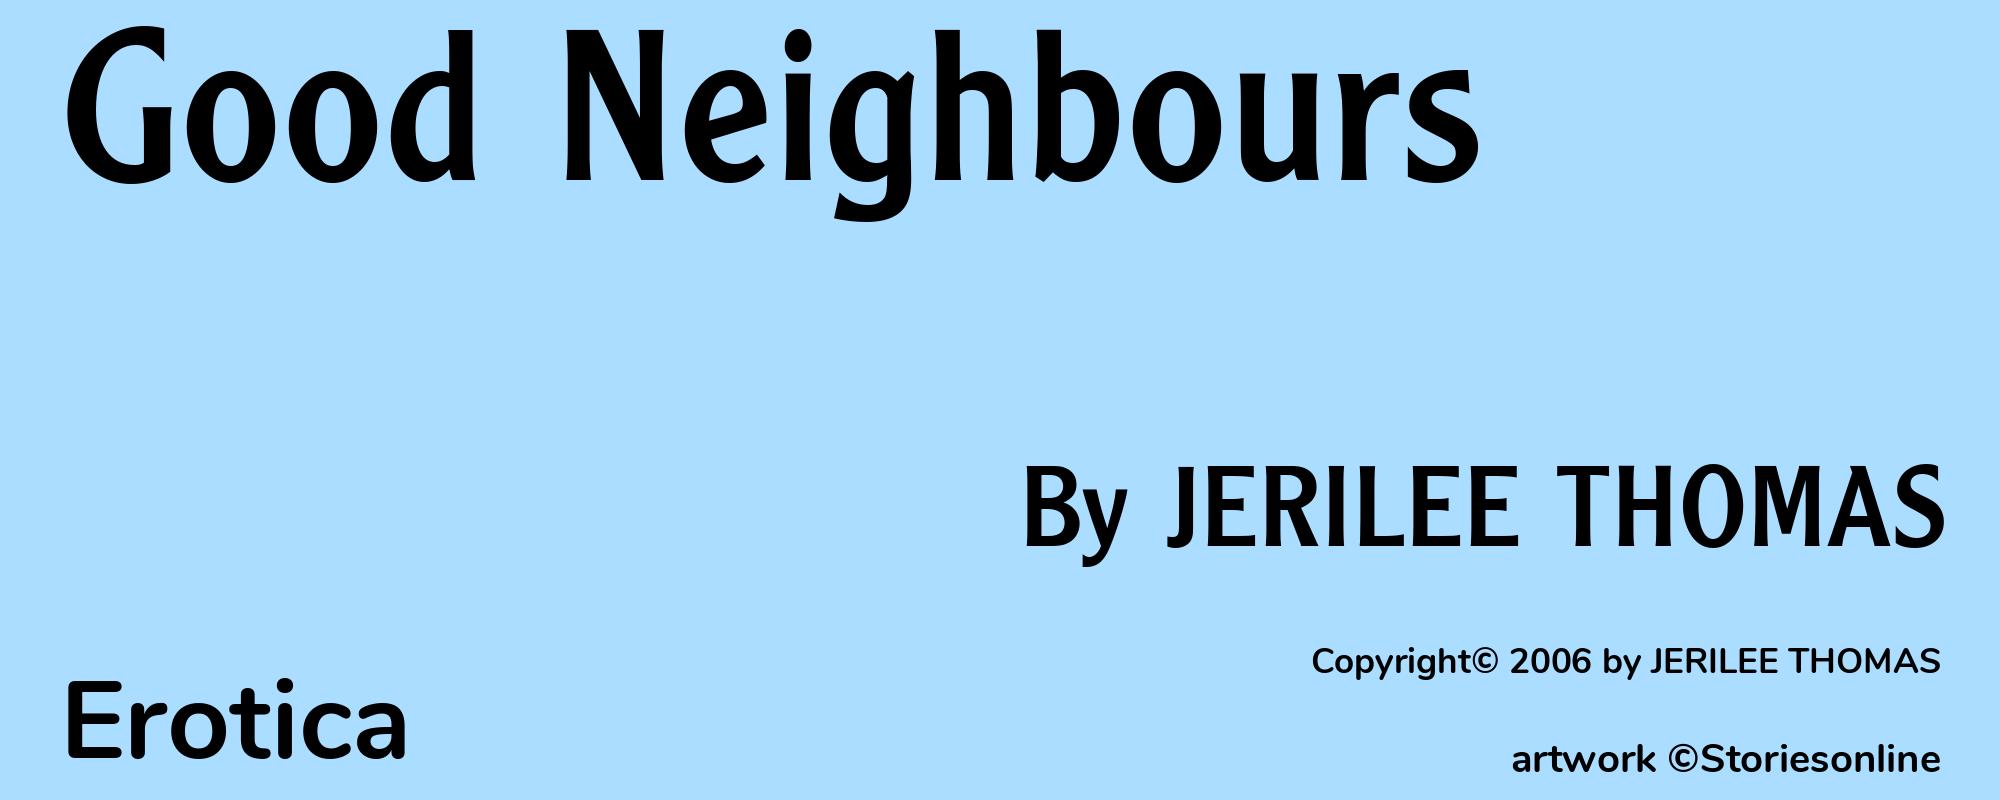 Good Neighbours - Cover